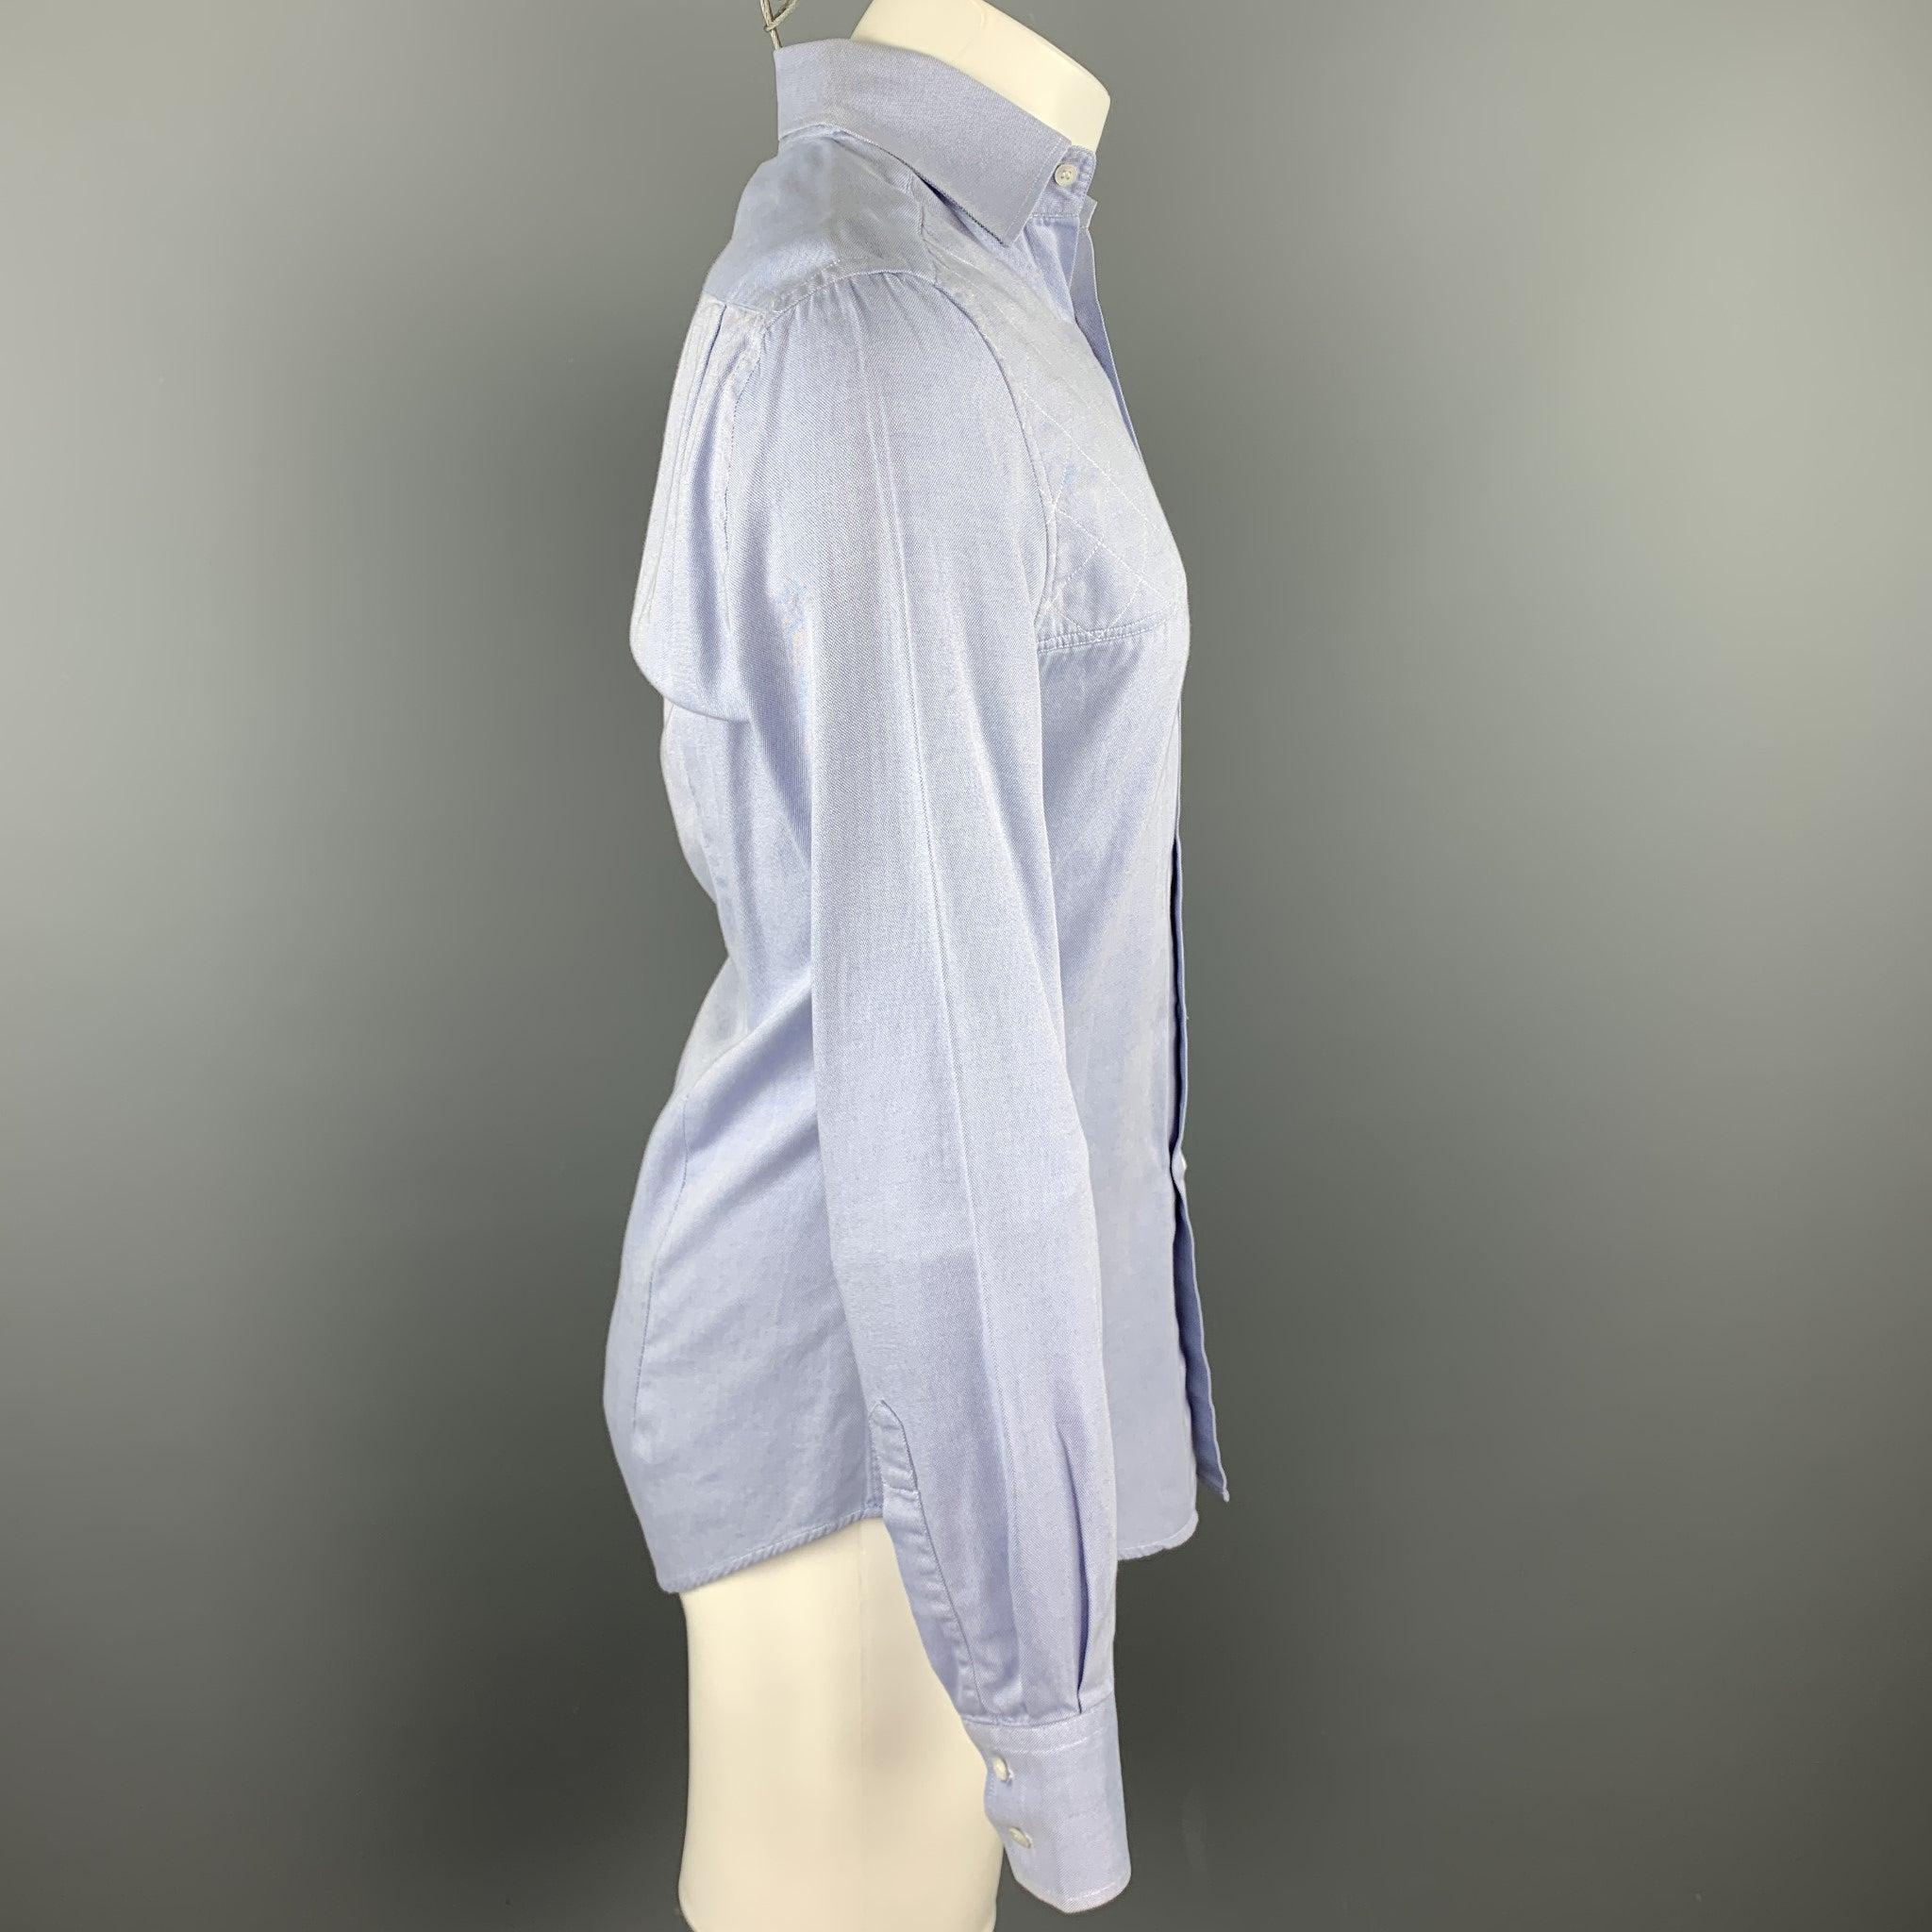 MICHAEL BASTIAN Size S Light Blue Cotton Button Up Long Sleeve Shirt In Good Condition For Sale In San Francisco, CA